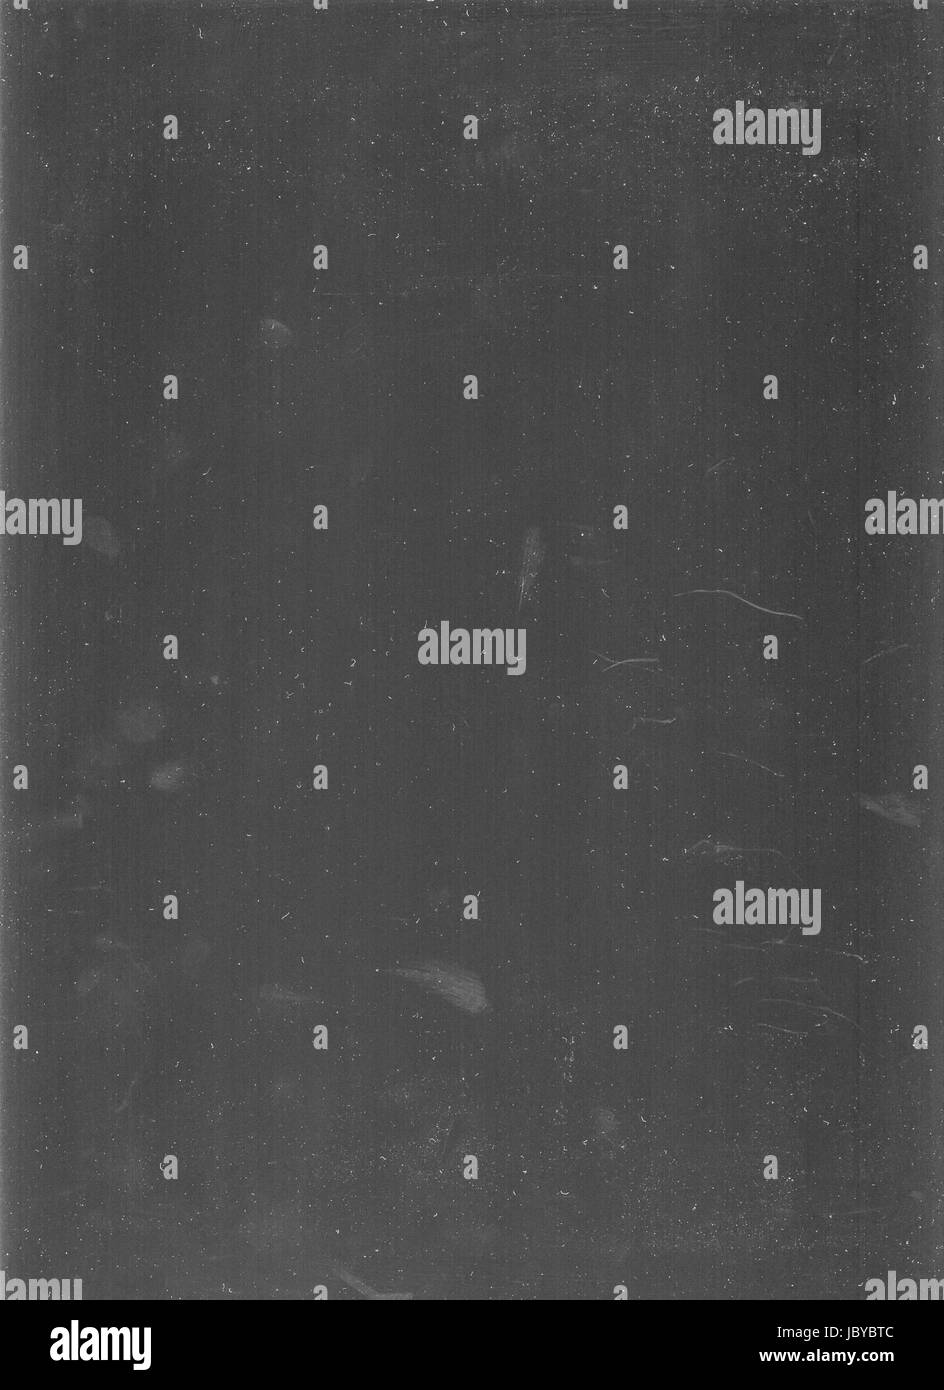 Dust, speckles and fingerprints on a dirty flatbed scanner causing image quality degradation Stock Photo